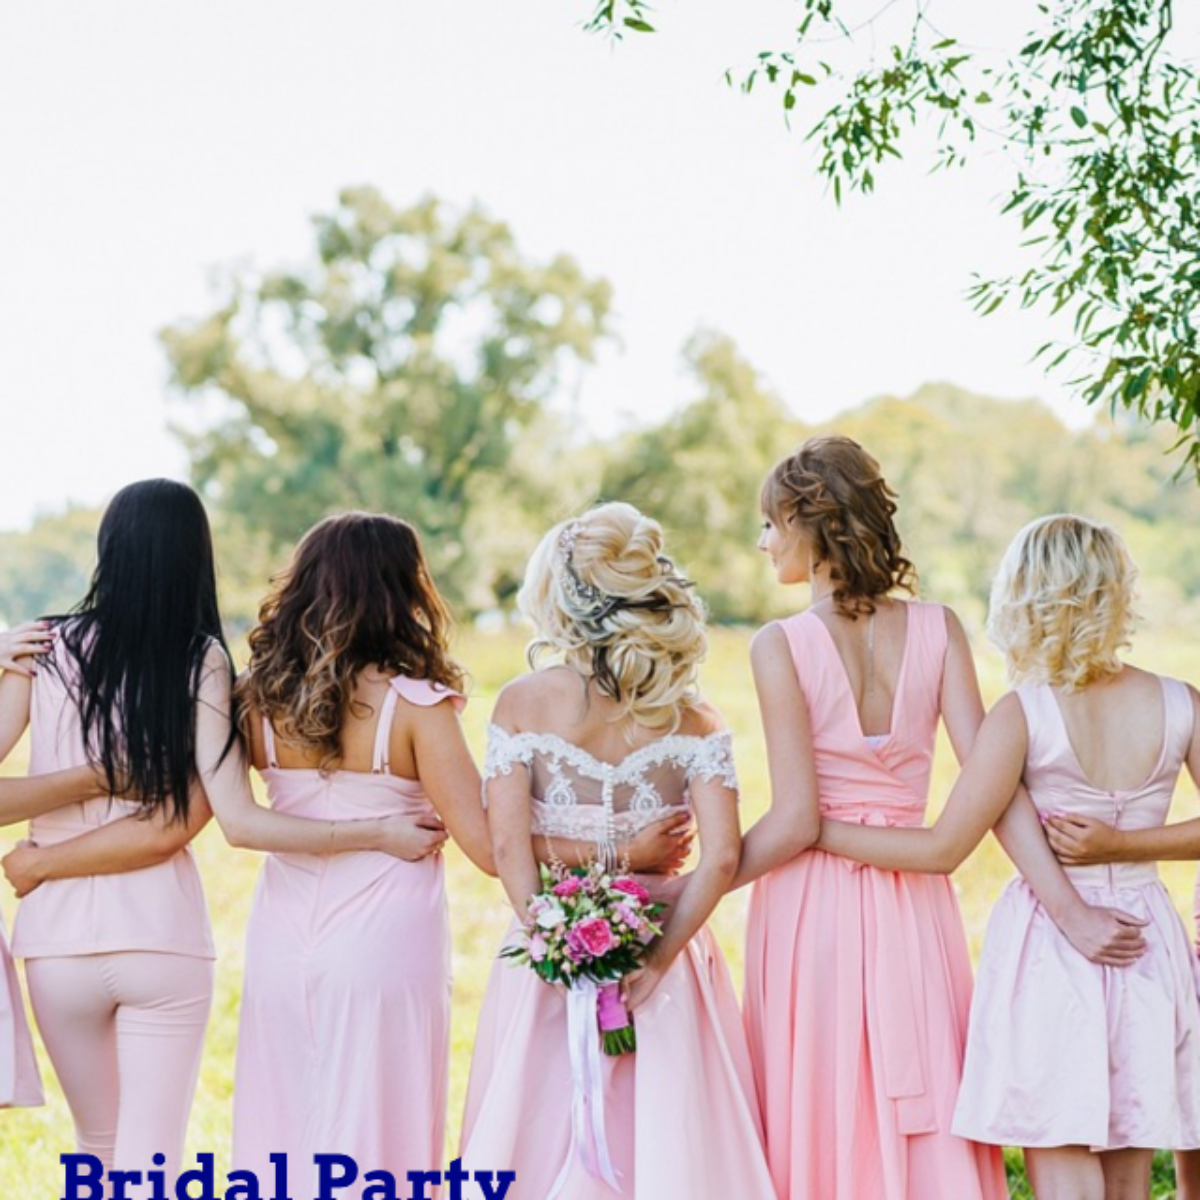  Bridal Party Itinerary Template